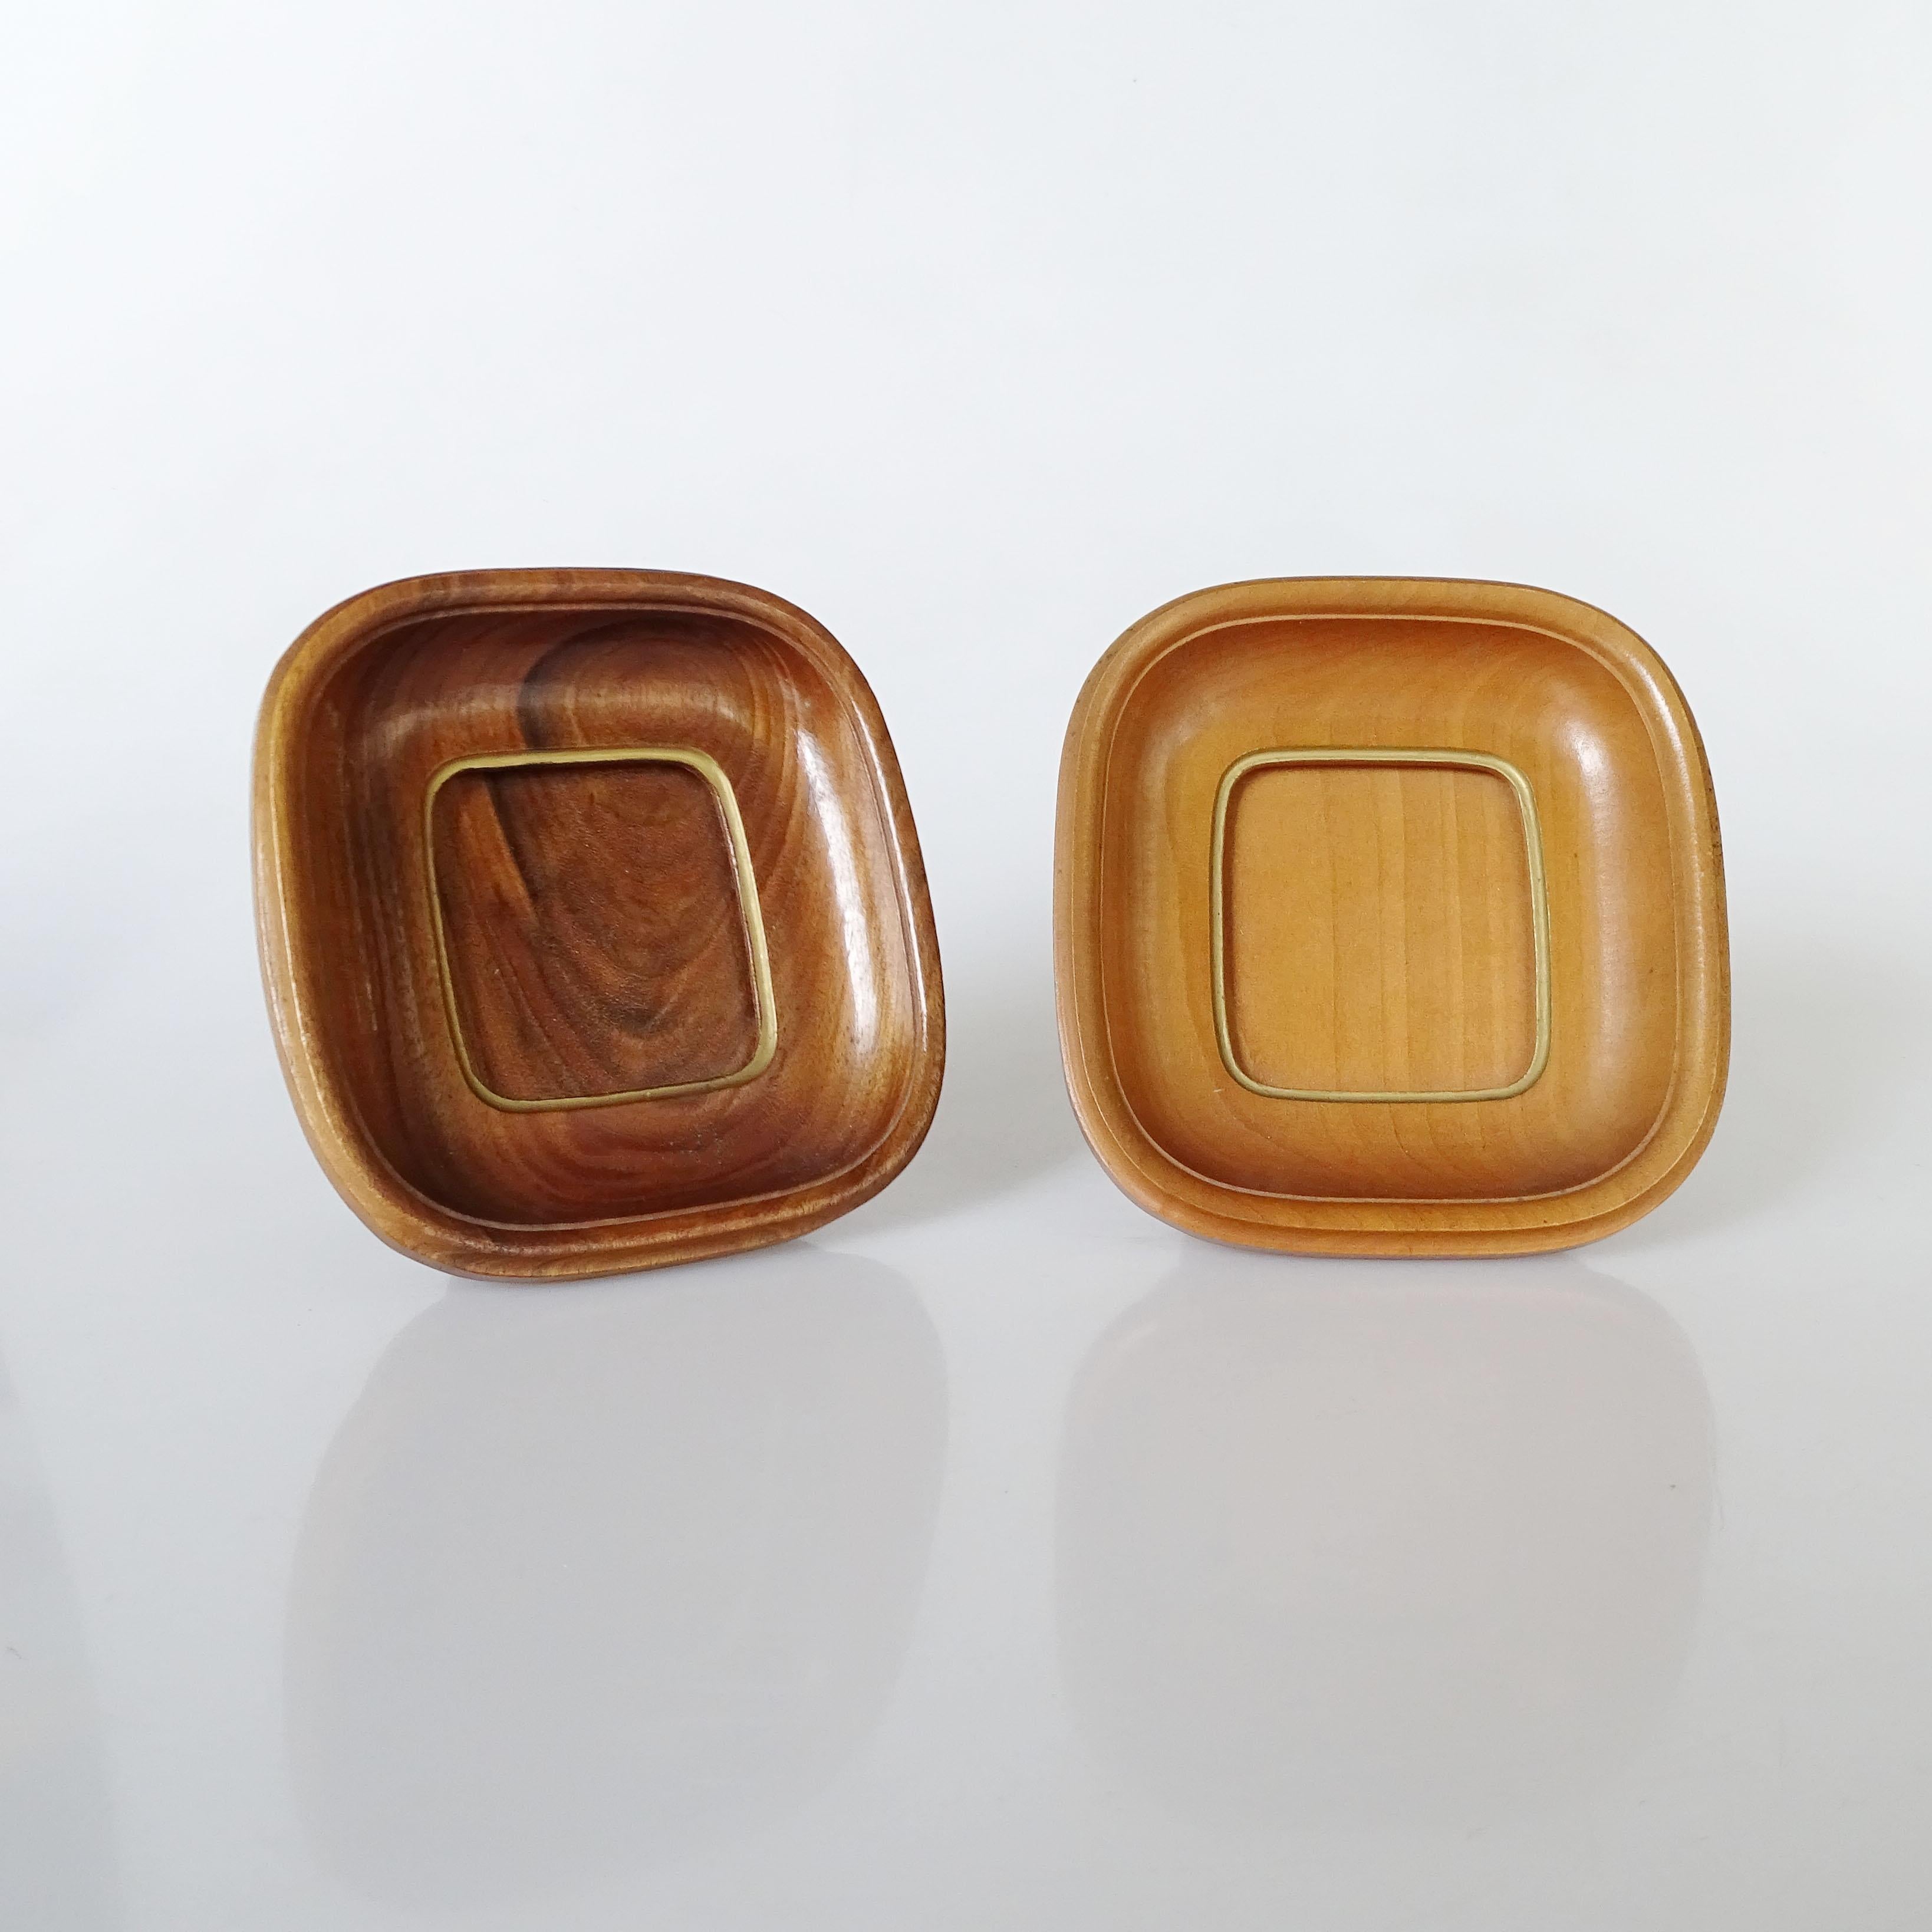 Splendid pair of small Italian table frames, 1940s
Two different woods 